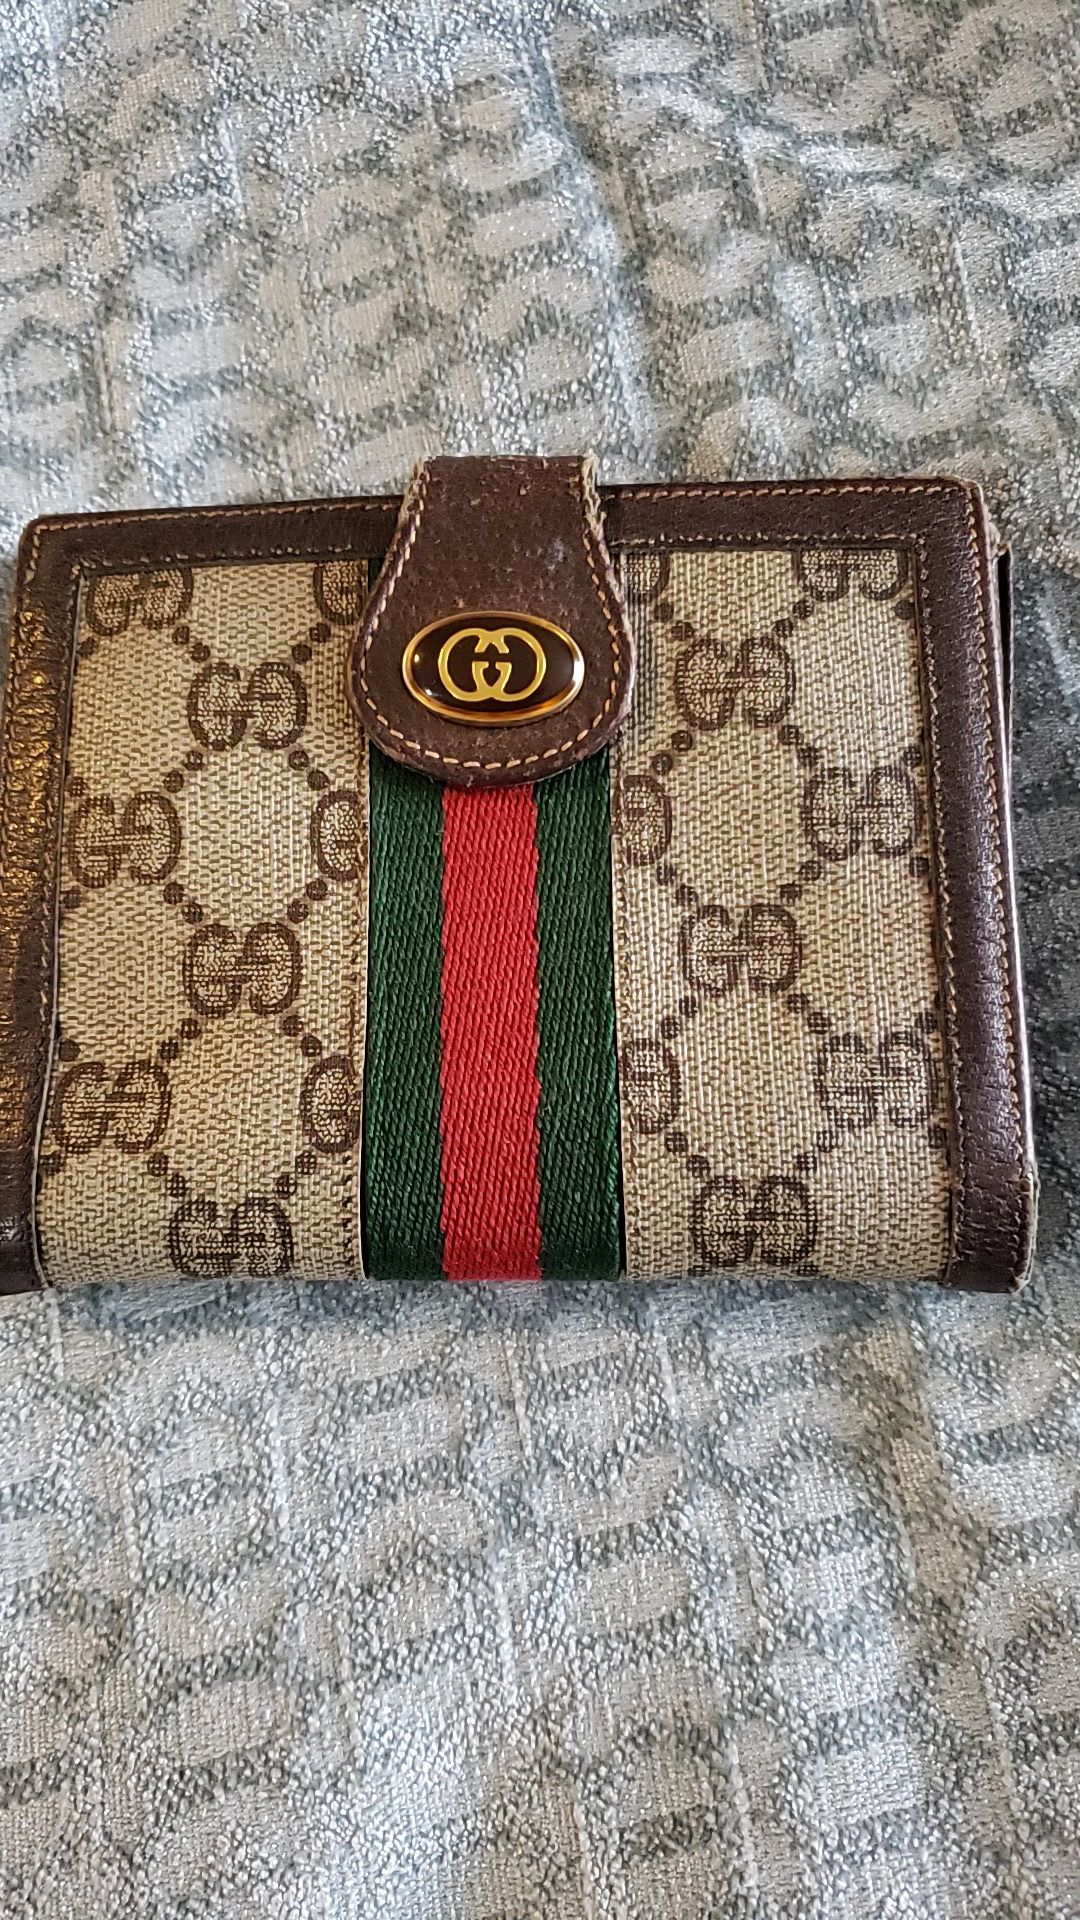 Gucci men's wallet used